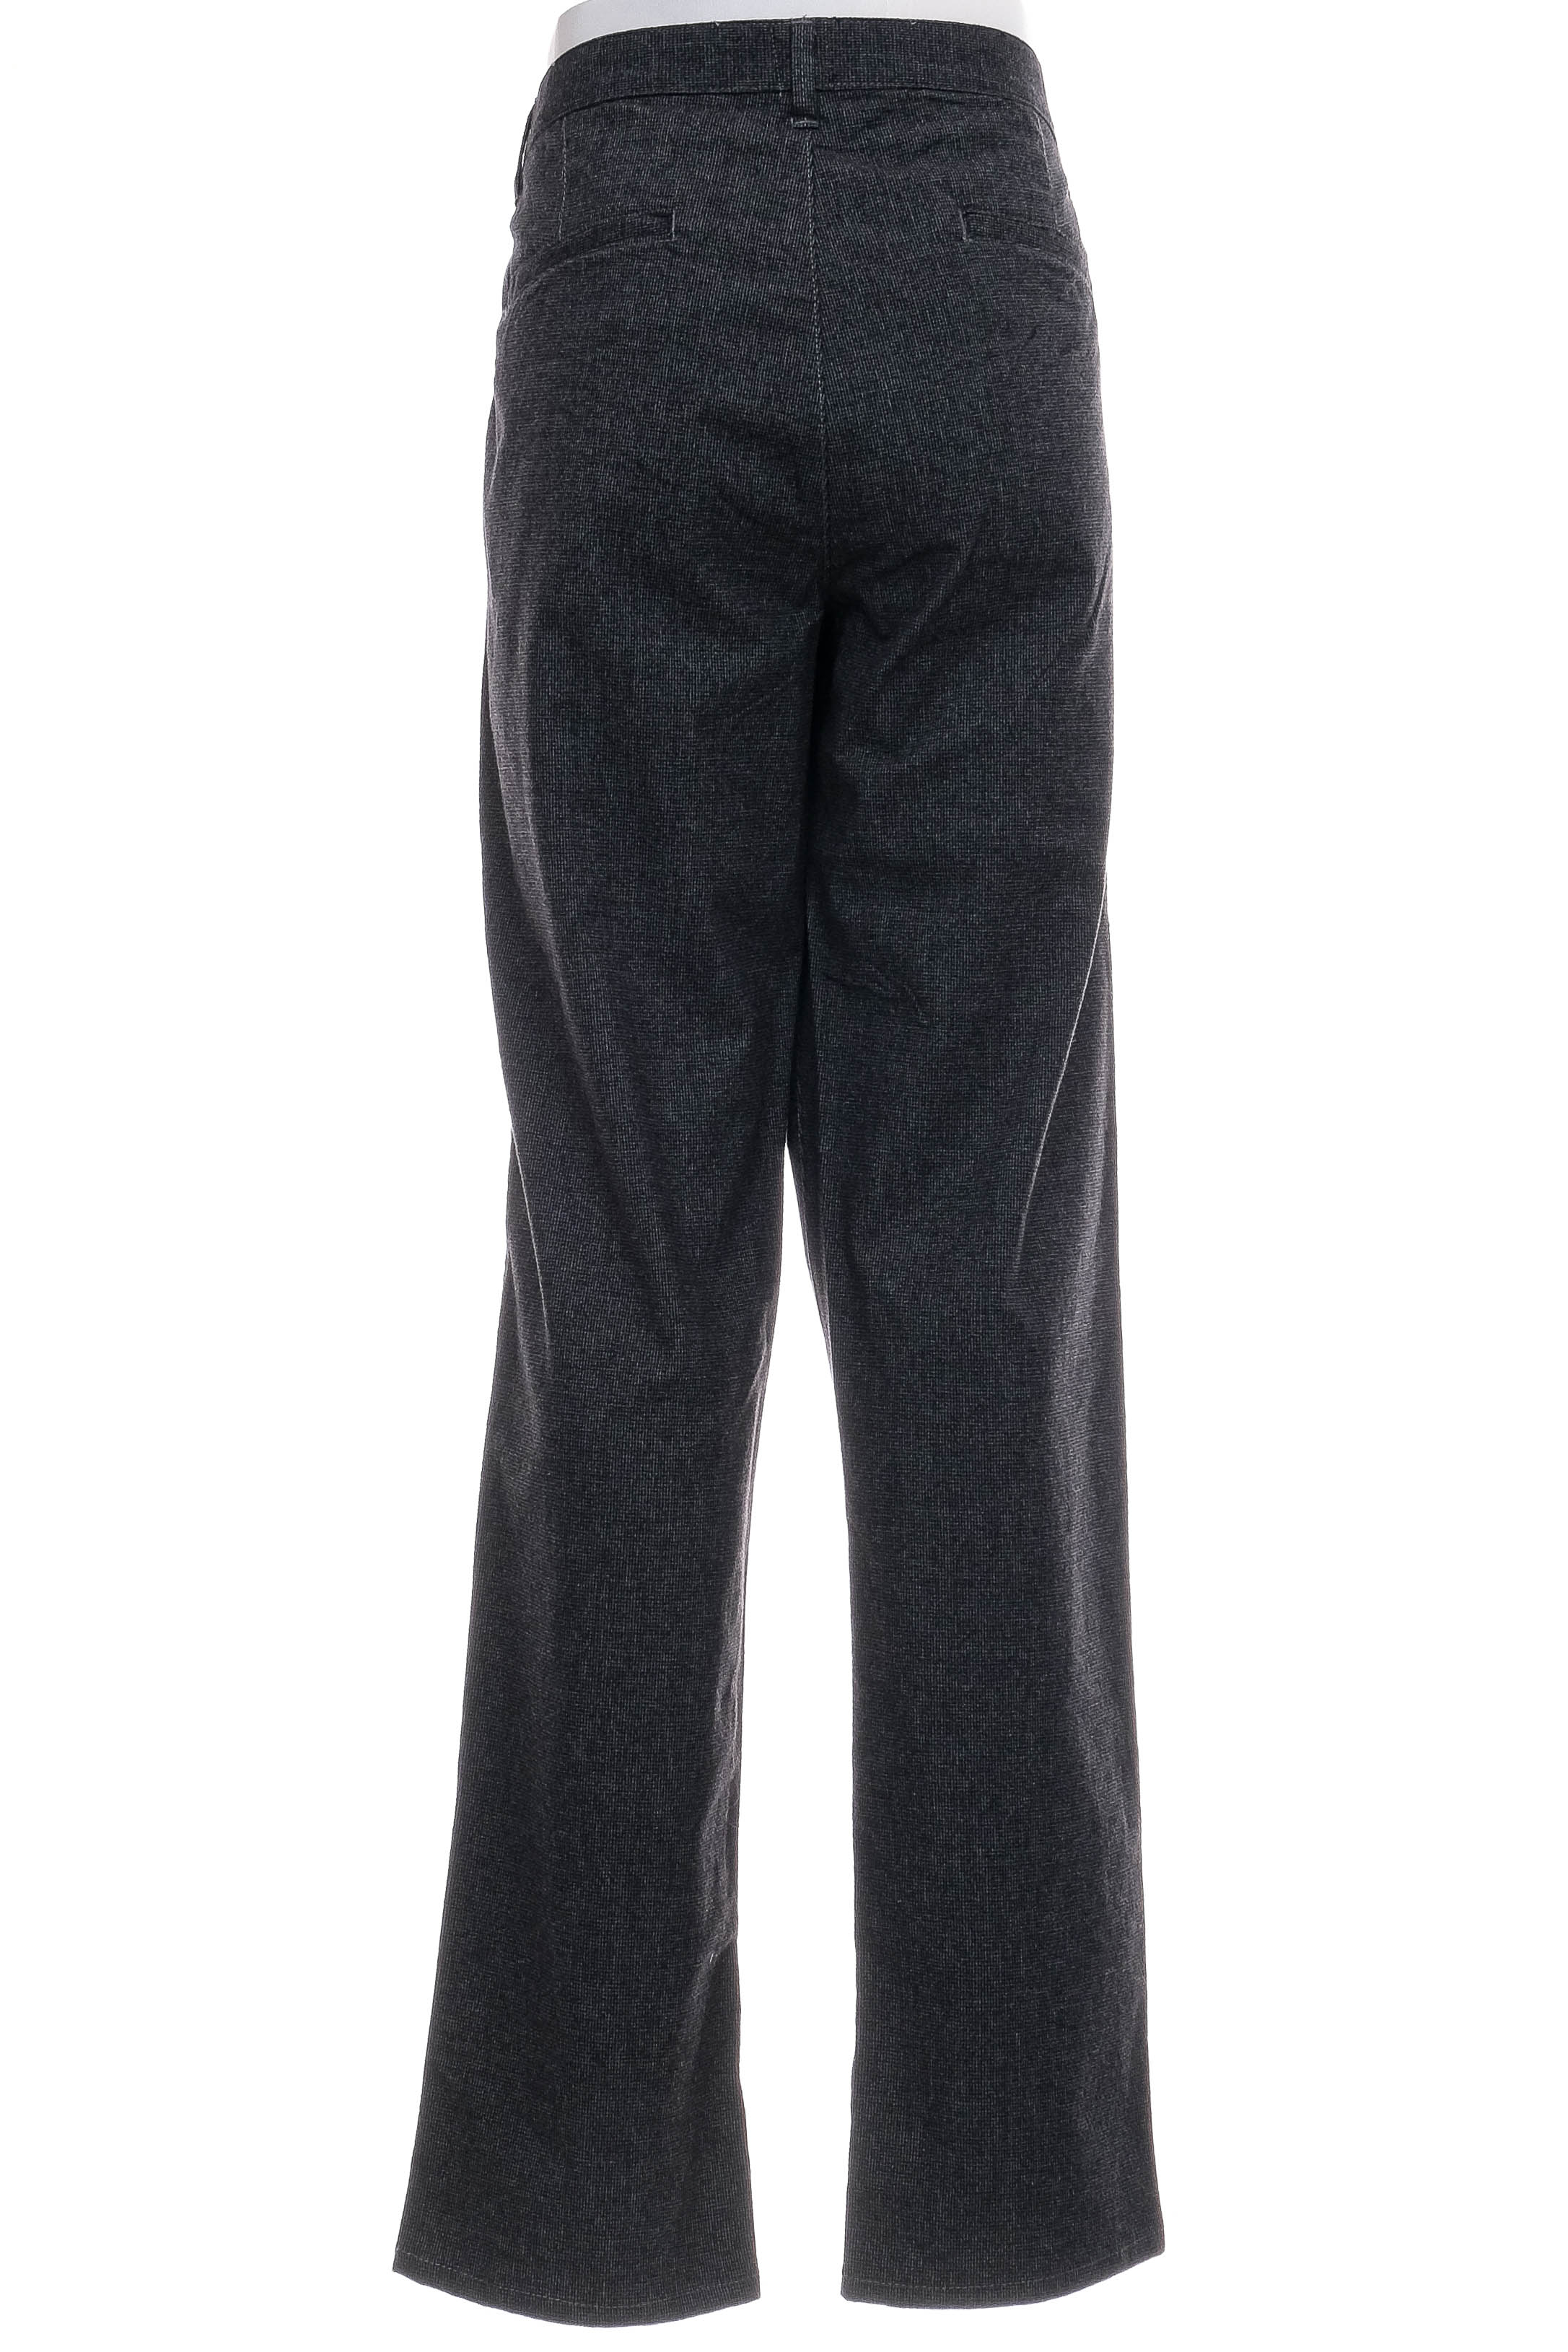 Men's trousers - Straight Up - 1